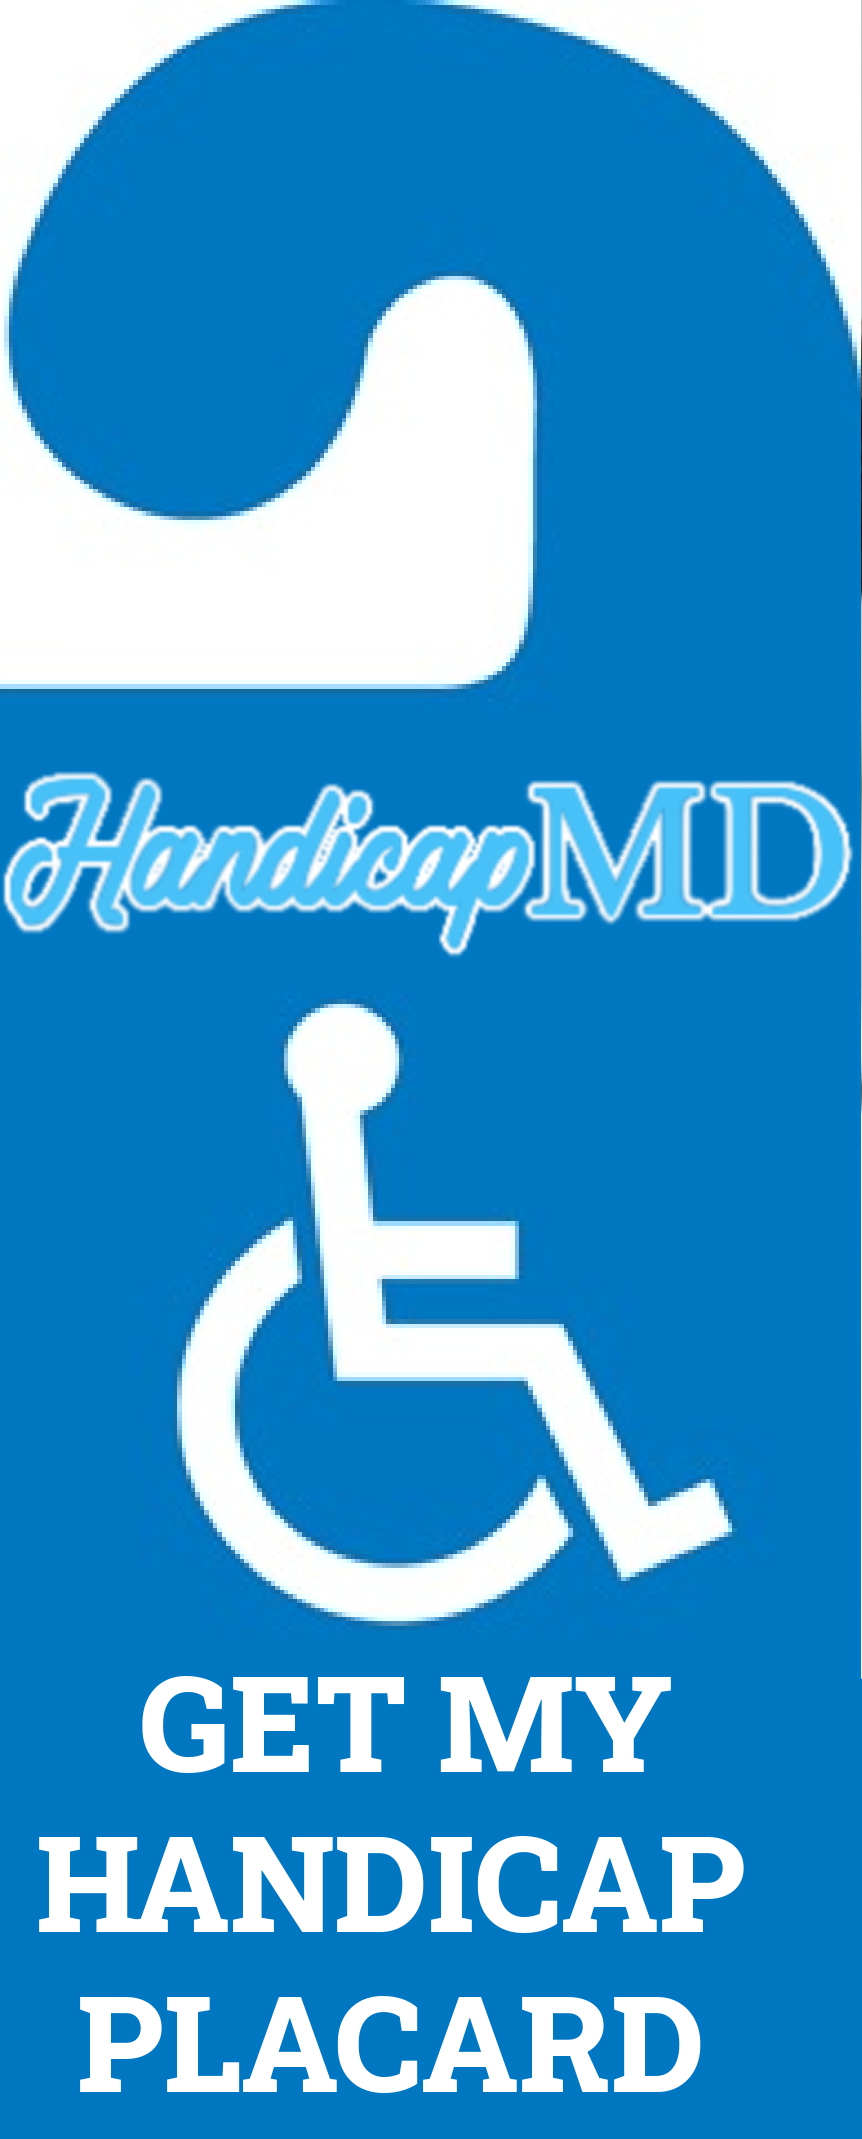 Myths vs. Facts: Debunking Common Misconceptions about Handicap Placards in Georgia